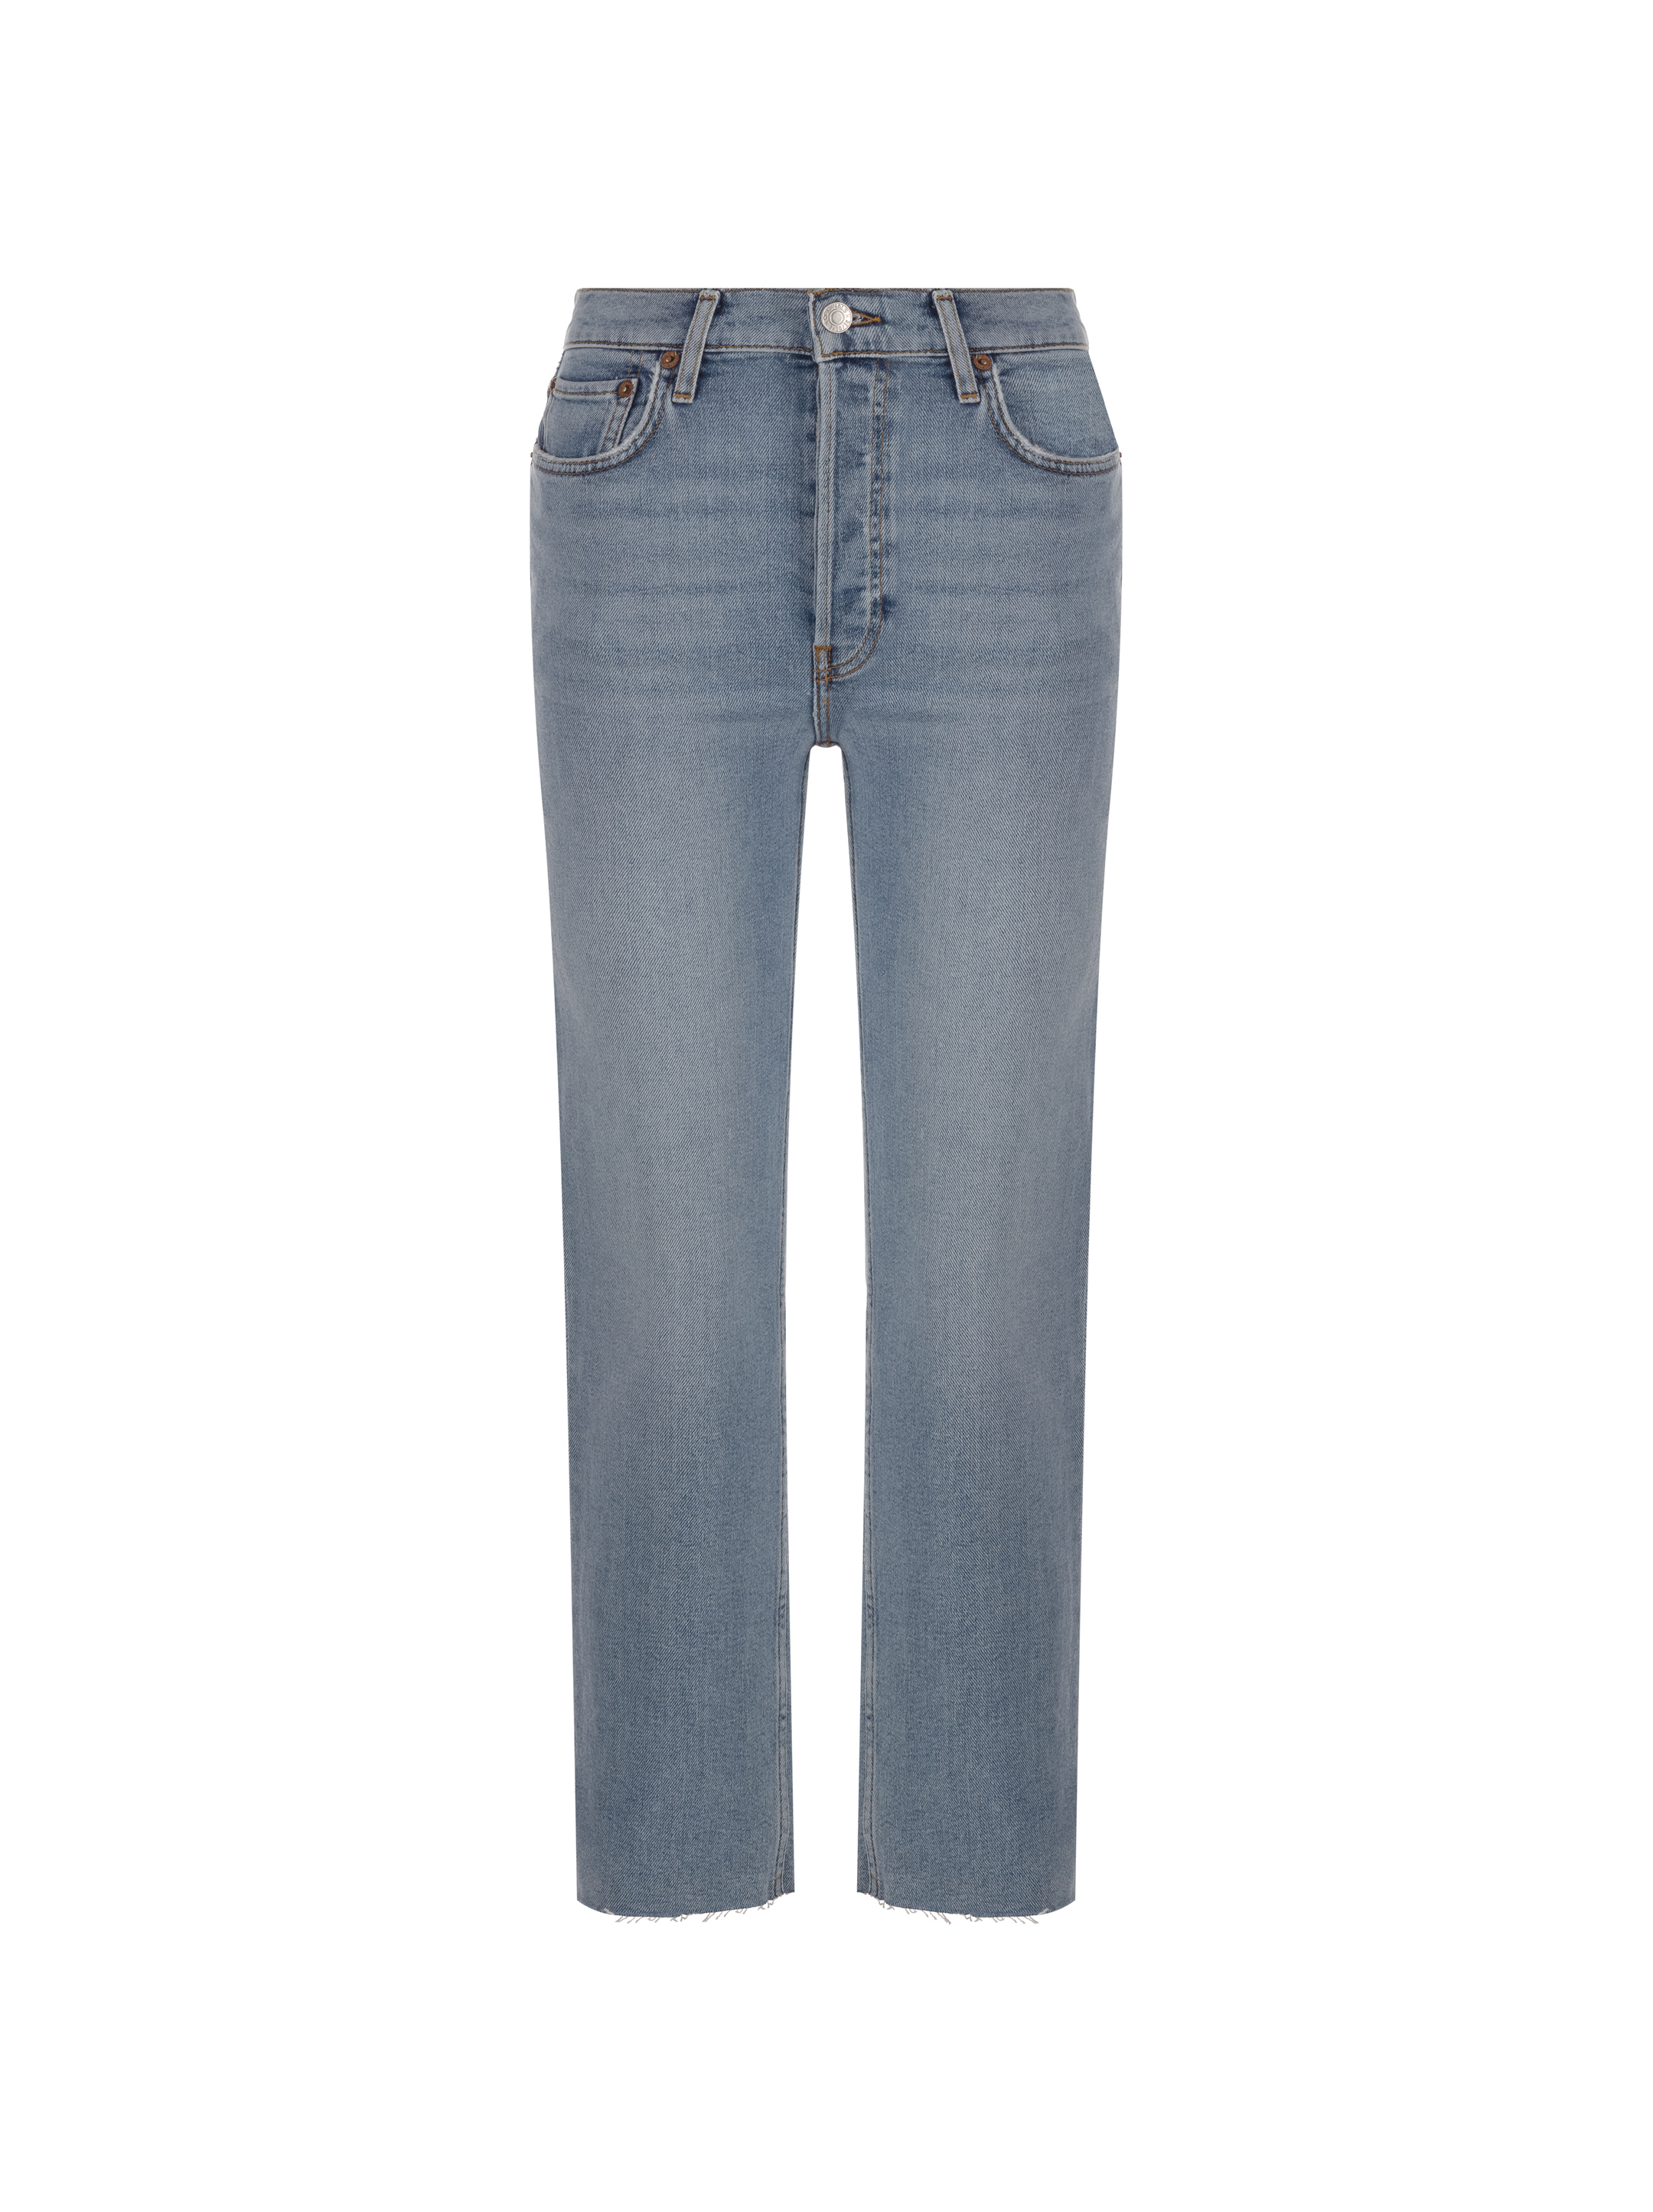 Stove Pipe cropped jeans